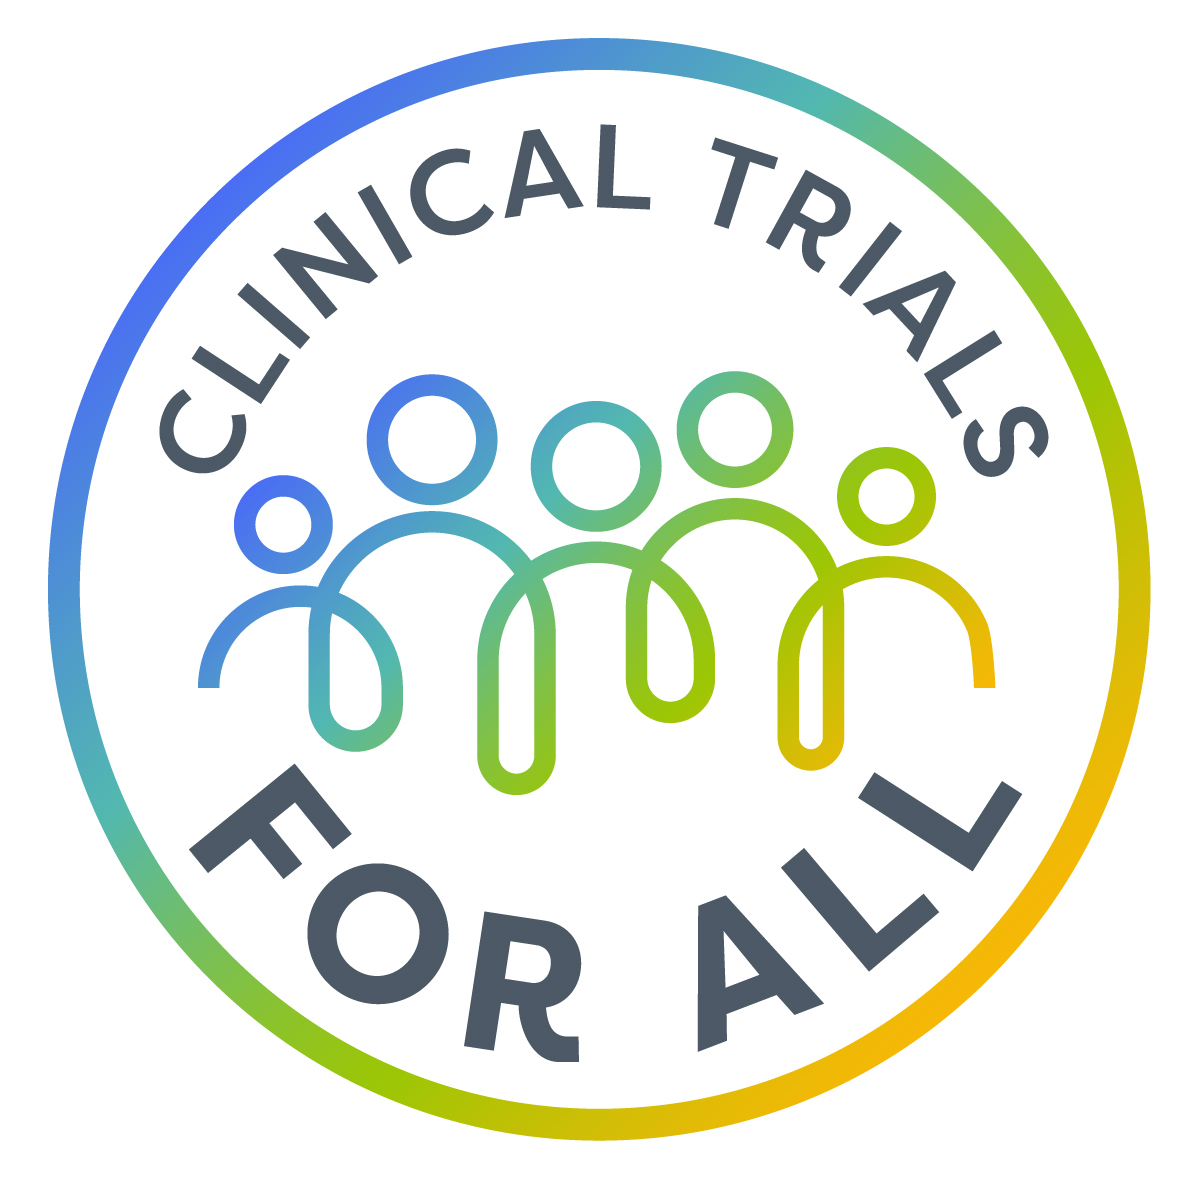 New Educational Initiative, Clinical Trials For All, to Drive More Understanding, Participation, and Diversity